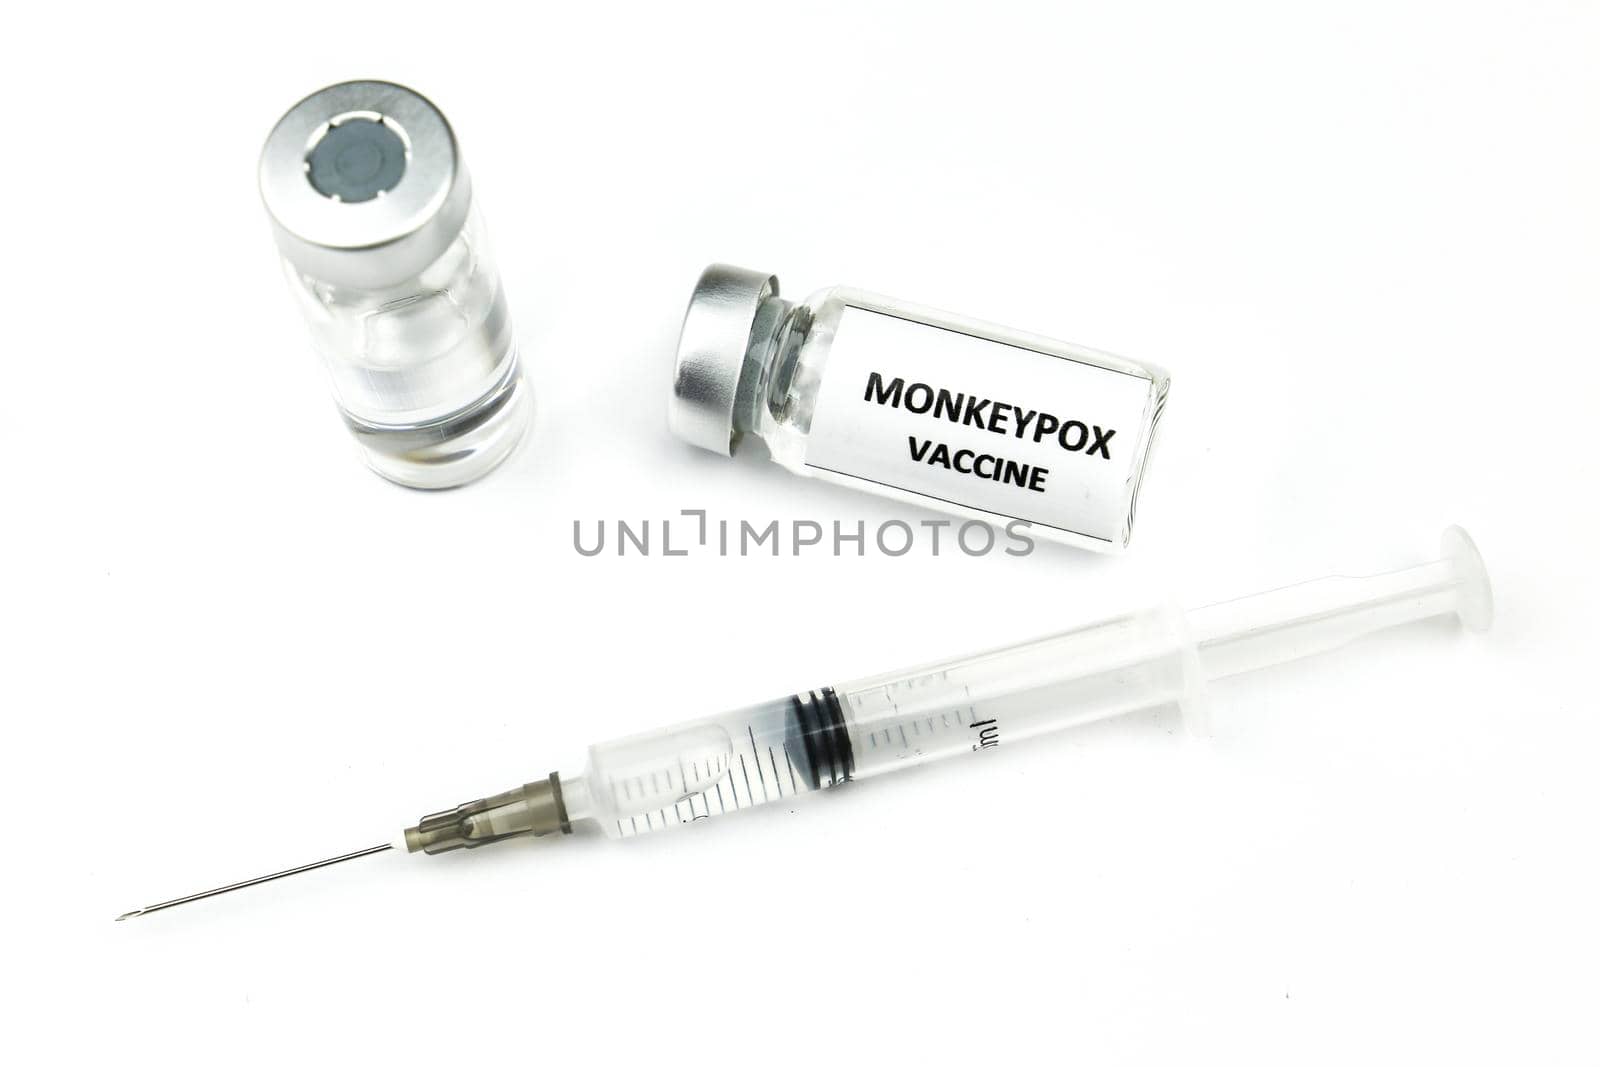 Vials and syringe filled with Monkeypox vaccine by soniabonet